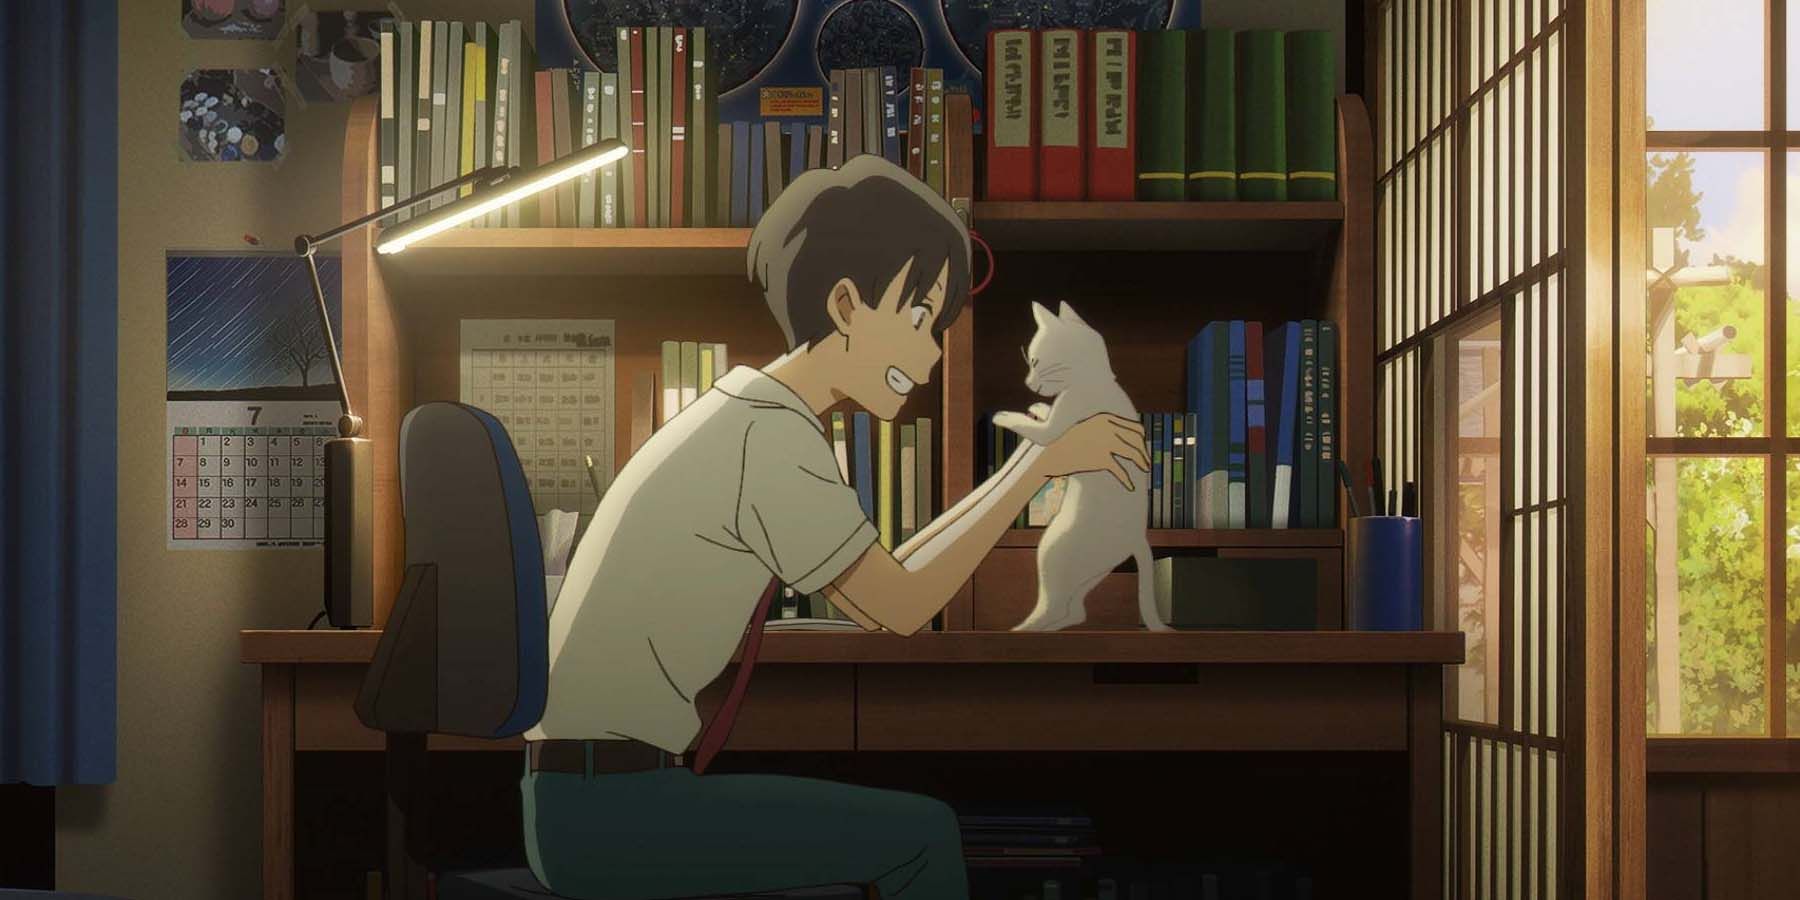 Kento holding a cat in A Whisker Away anime